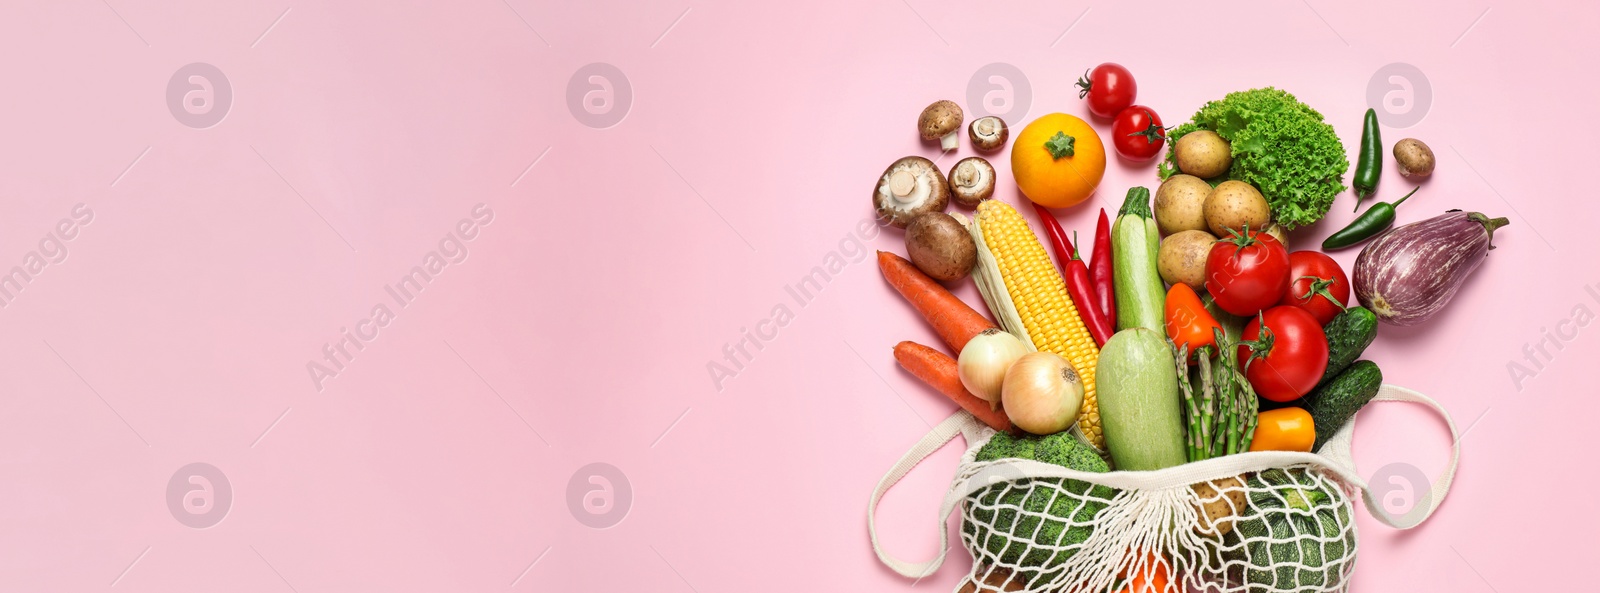 Image of Many fresh different vegetables on pale pink background, top view with space for text. Banner design 